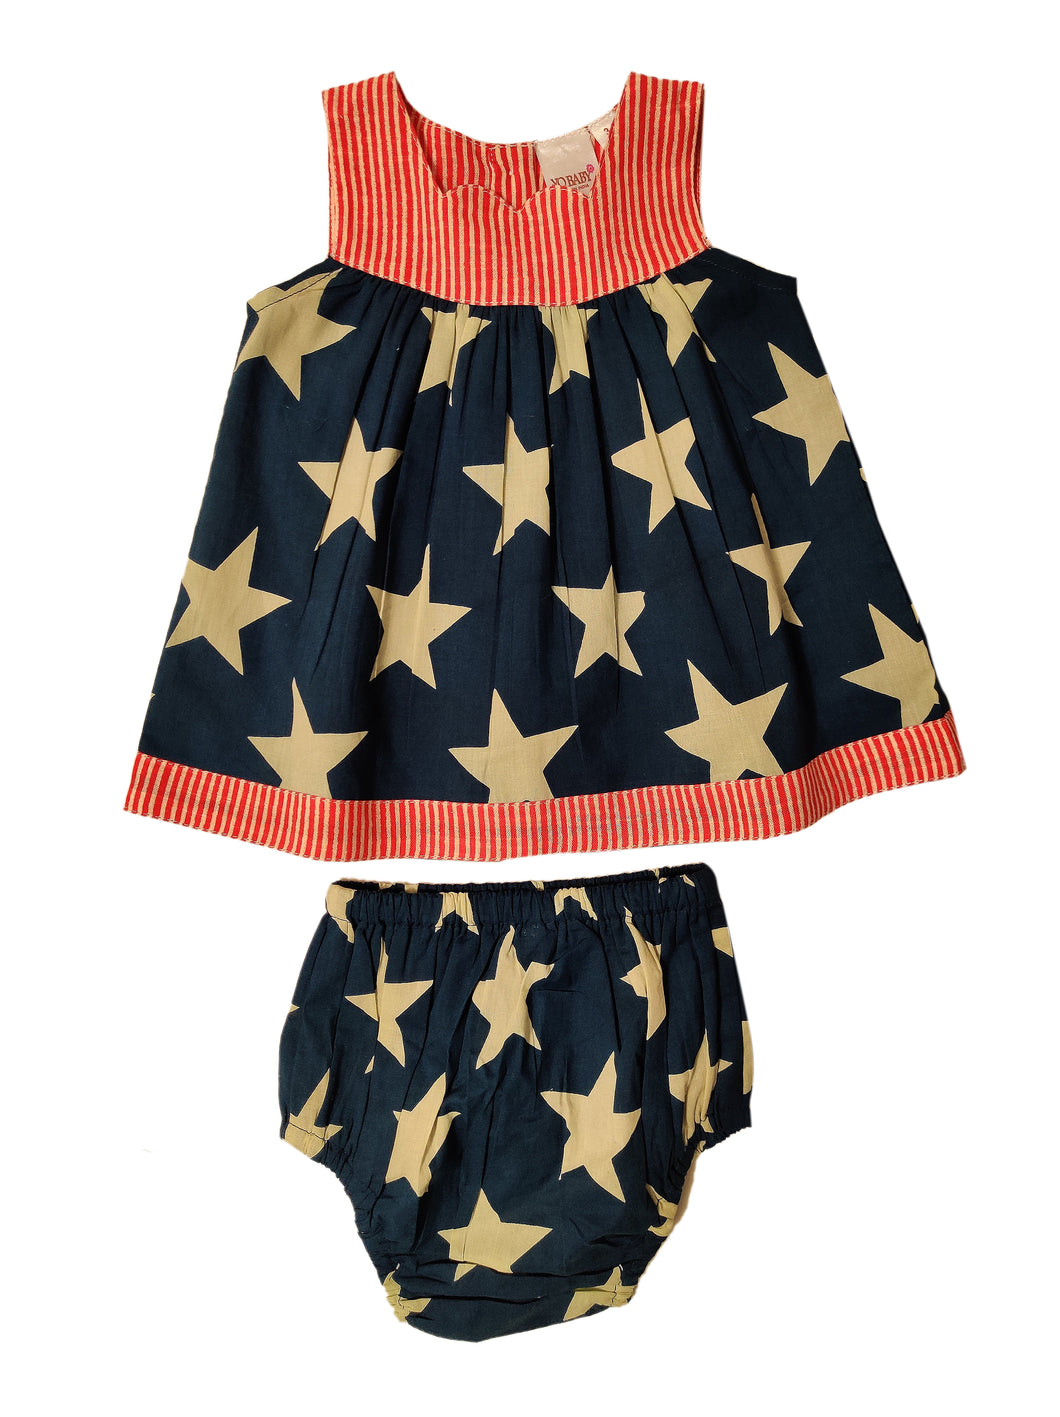 Star and Stripe Infant Dress and Matching Bloomer Set